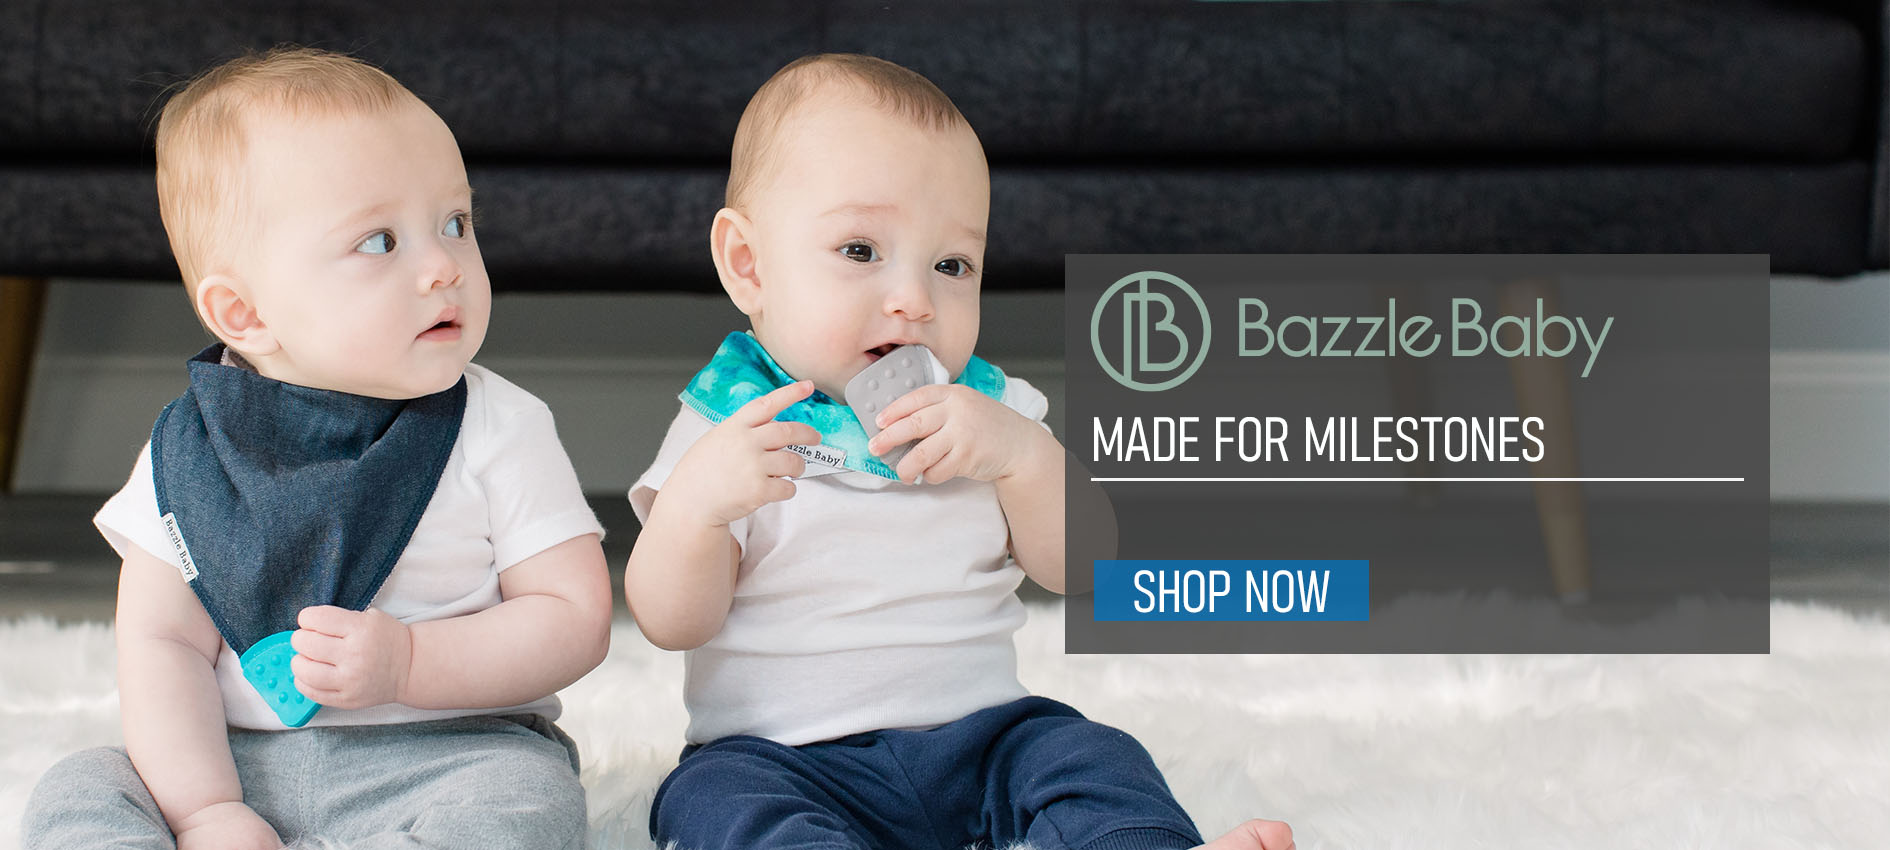 Bazzle Baby - Made for Life's Milestones